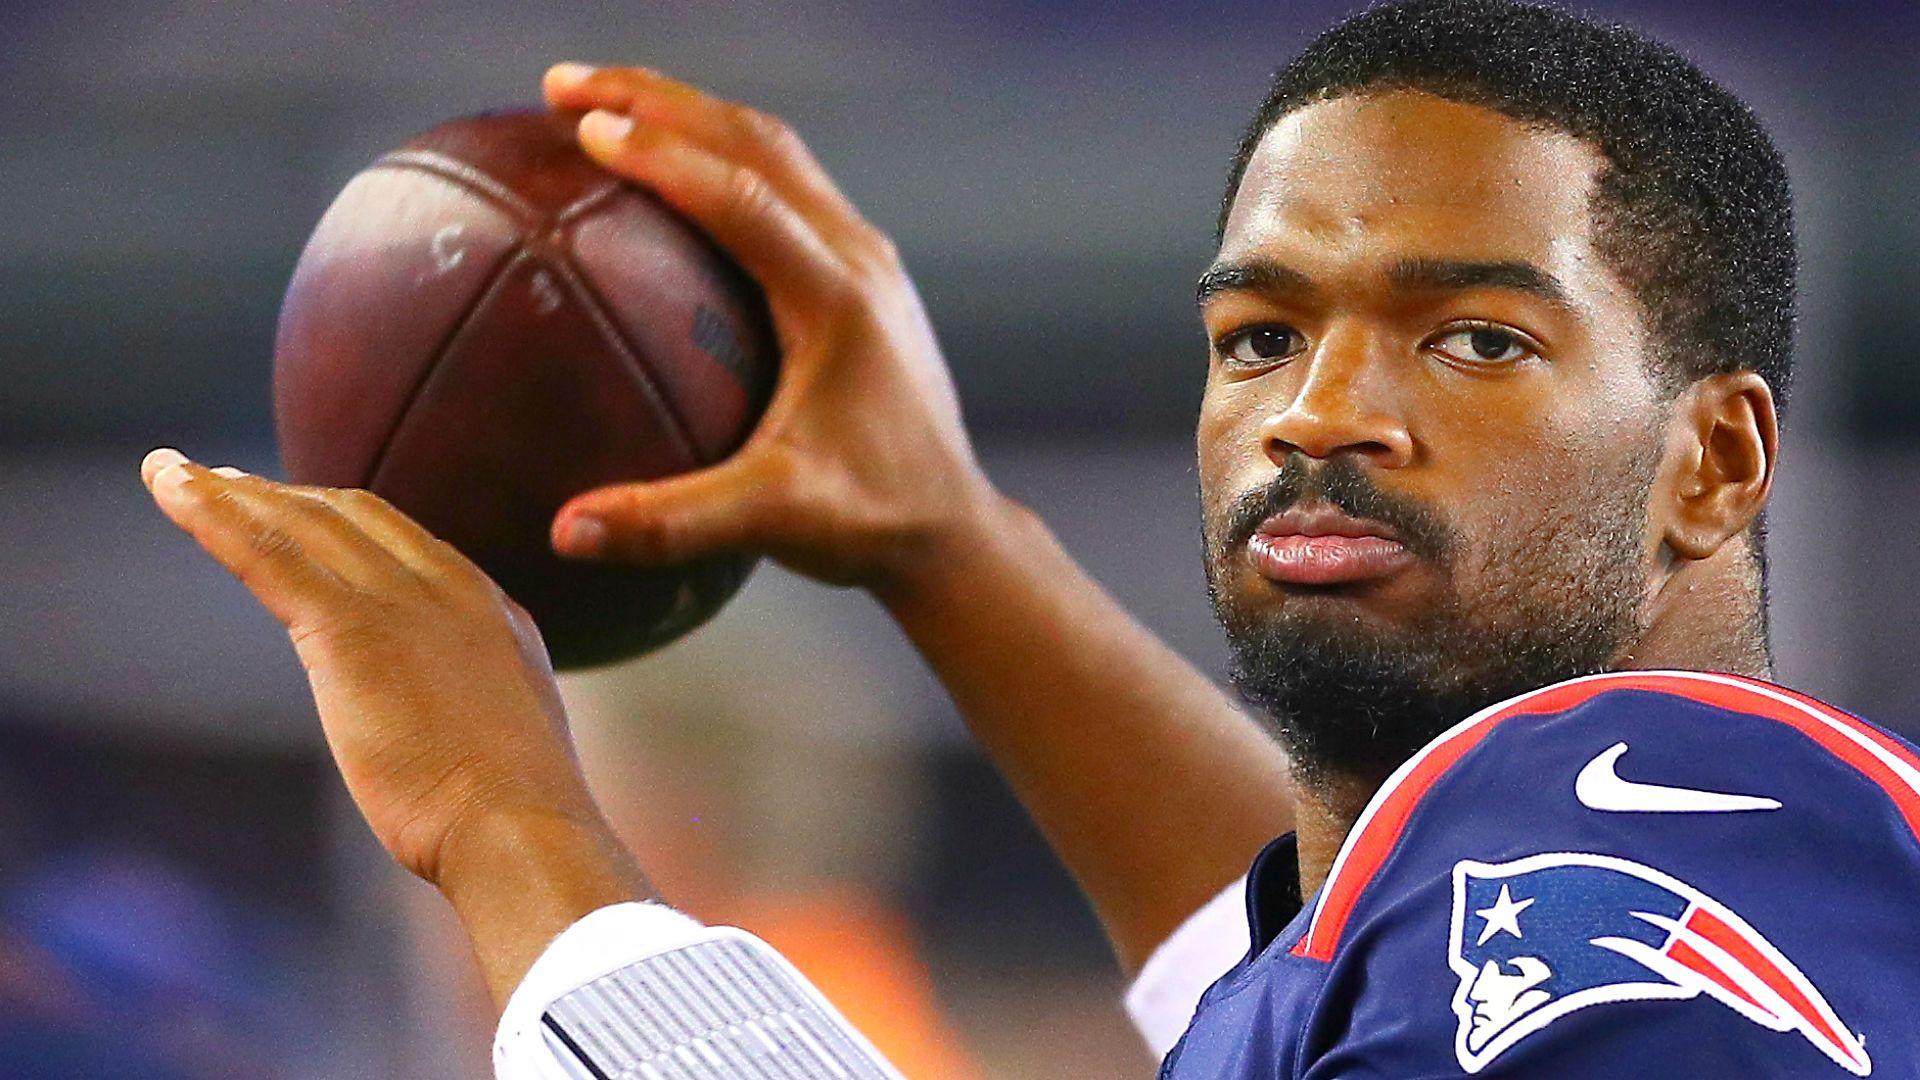 Jacoby Brissett to start at QB for Pats; Julian Edelman the backup